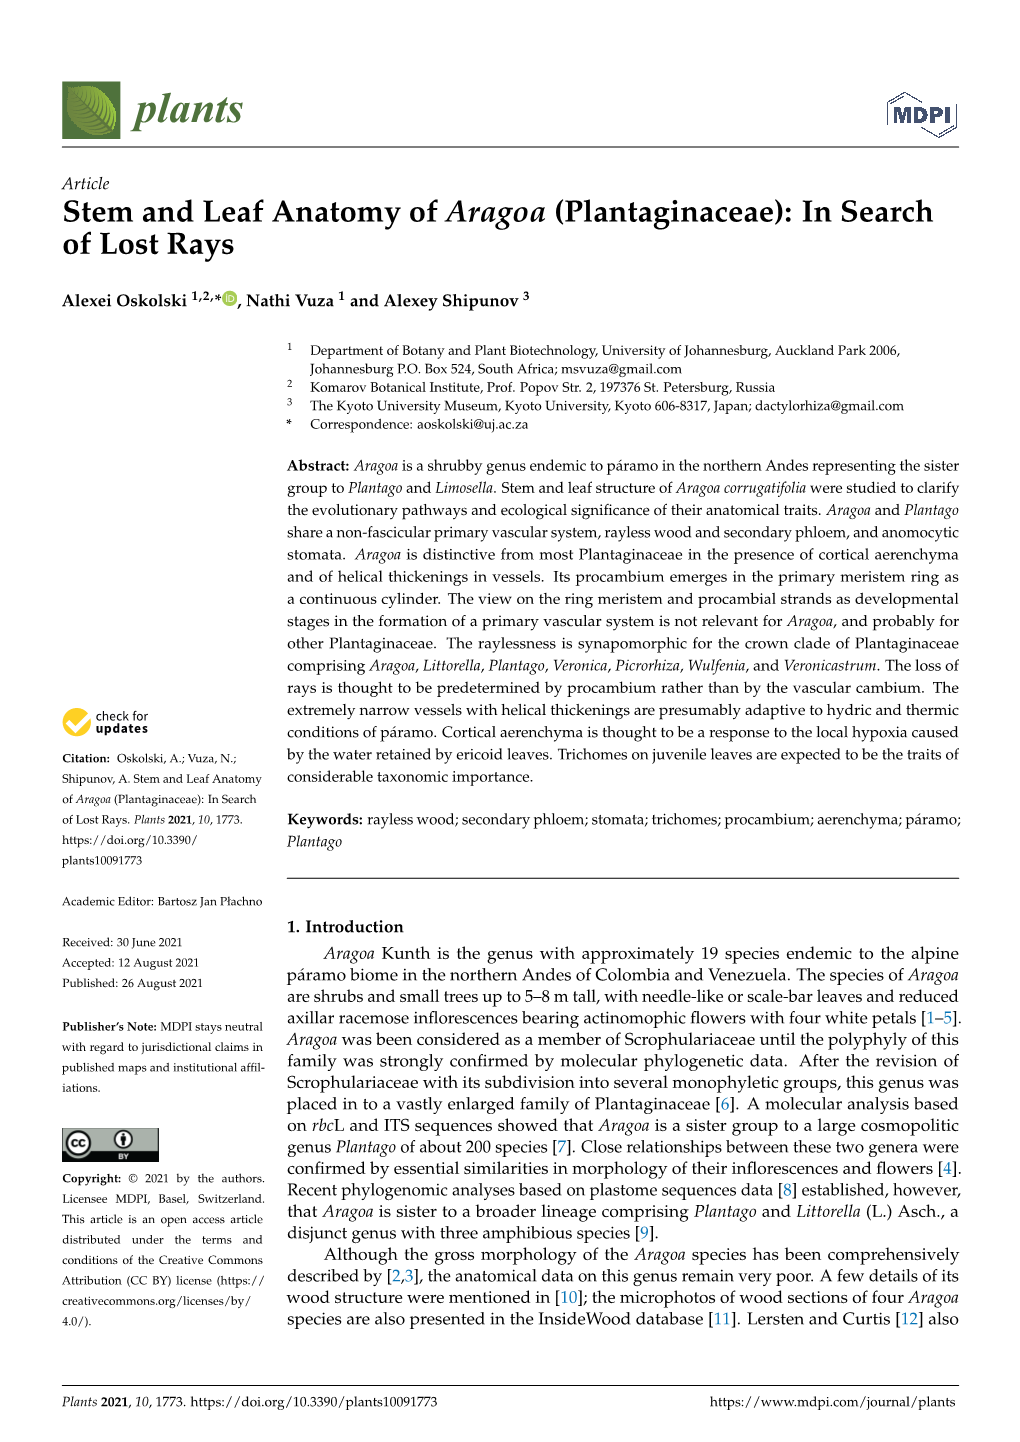 Stem and Leaf Anatomy of Aragoa (Plantaginaceae): in Search of Lost Rays